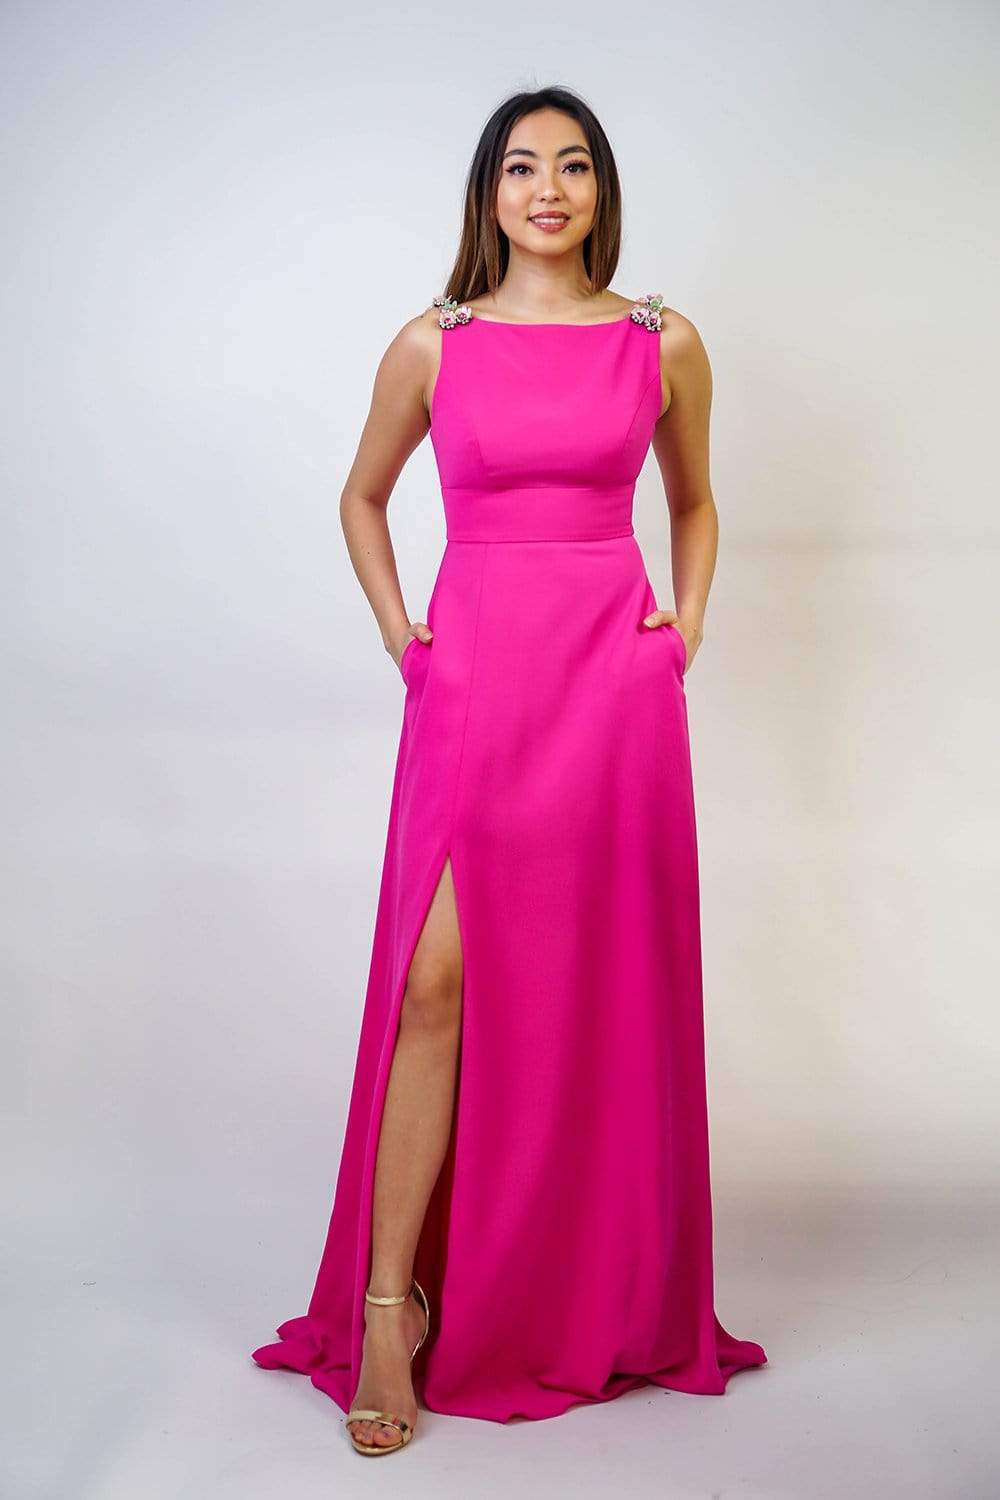 GOWNS Bow Neck A line Front Slit Lawson Gown - Chloe Dao